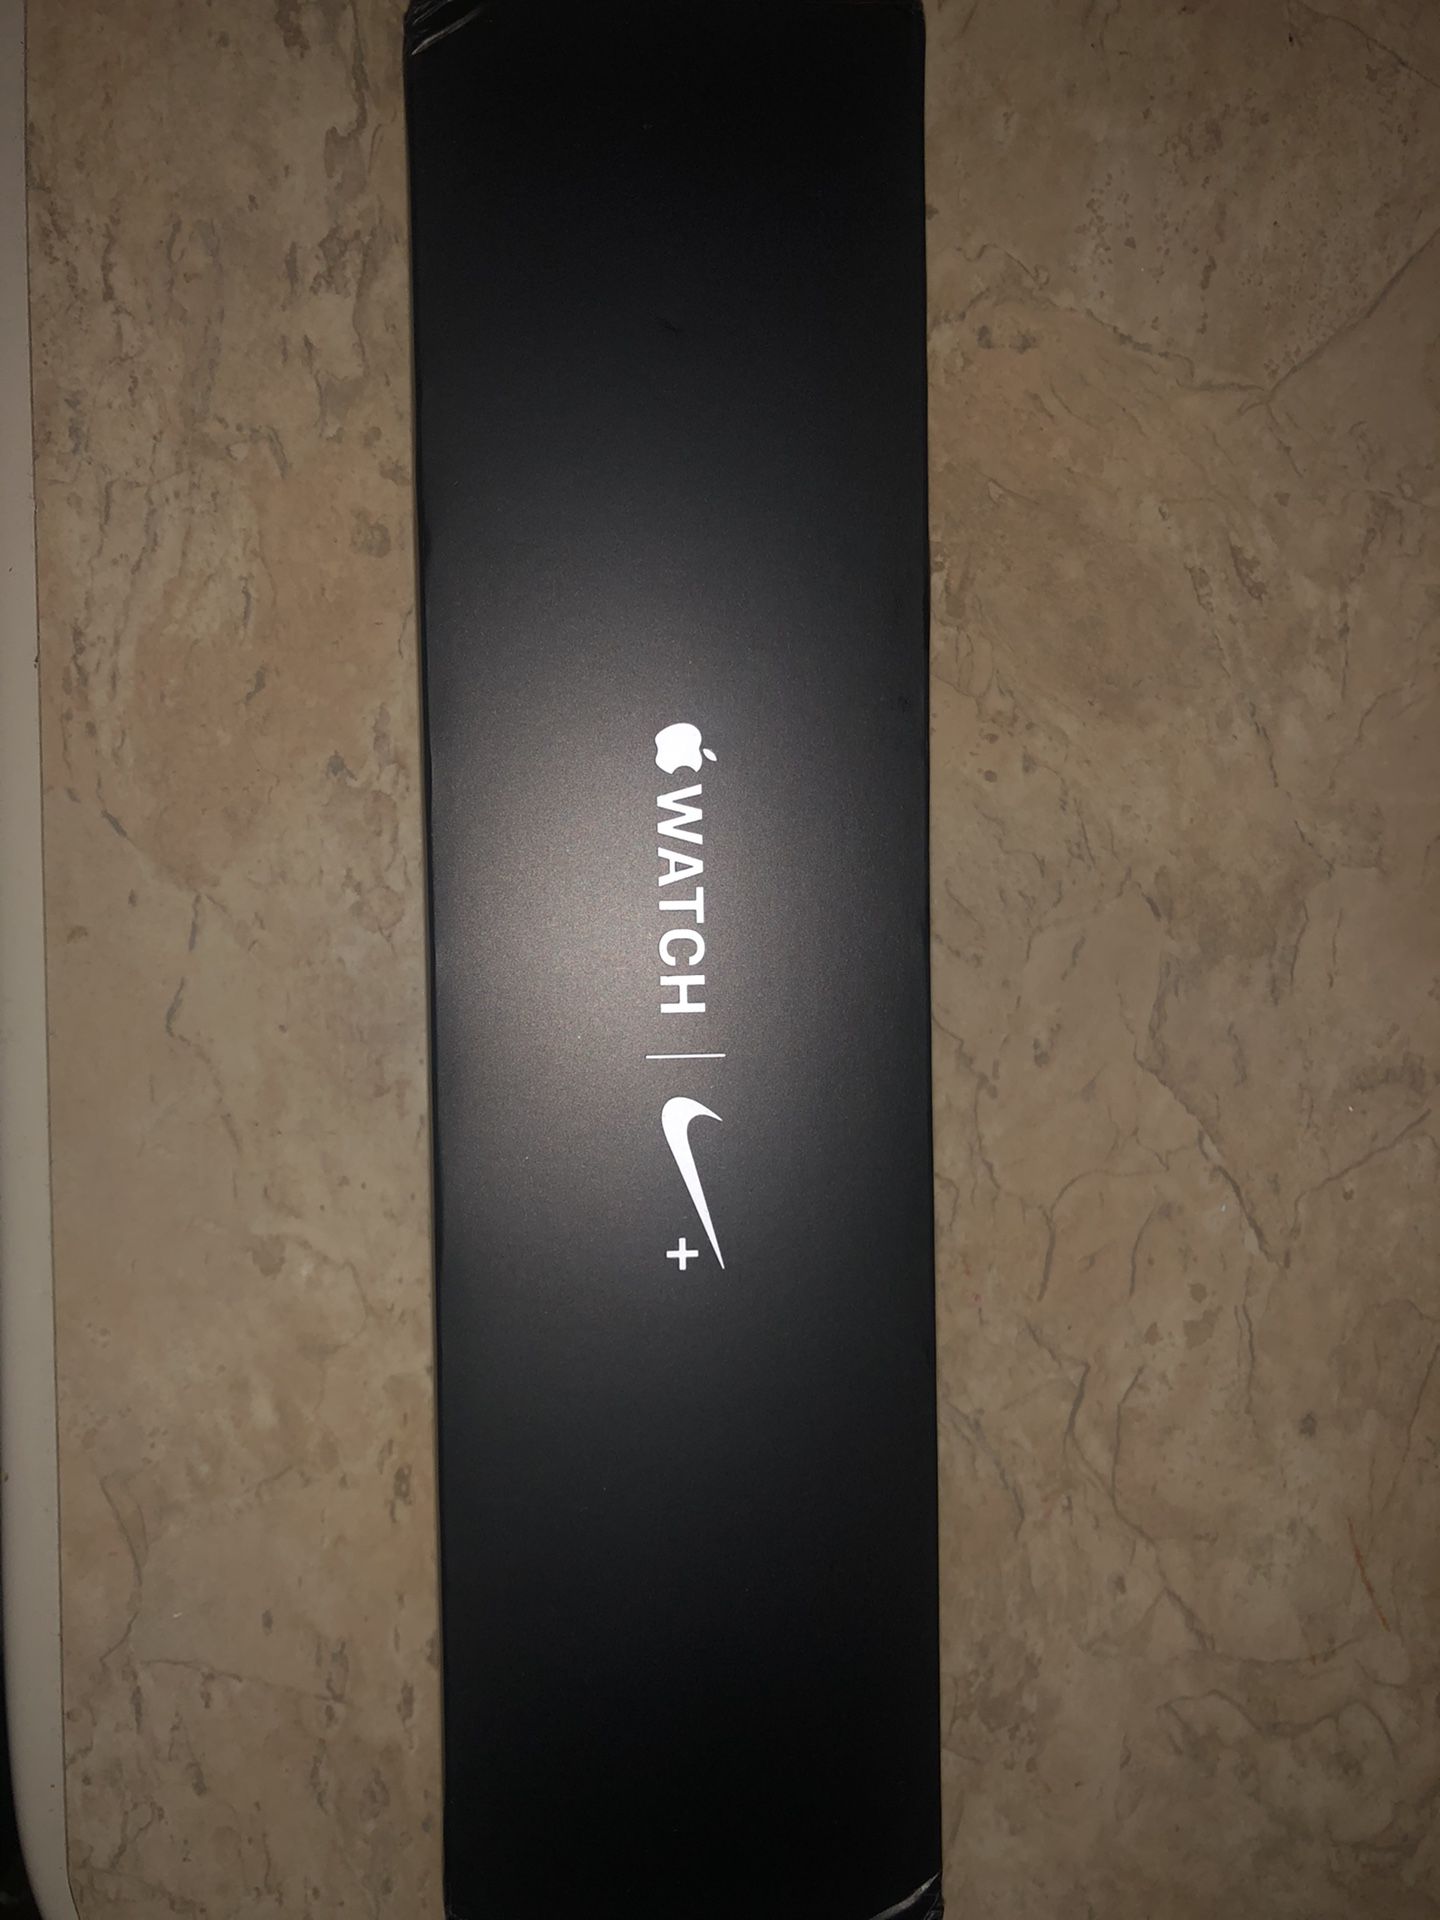 Nike+ Apple Watch Series 4 (GPS) - 44mm Black Sports Band - Space Gray